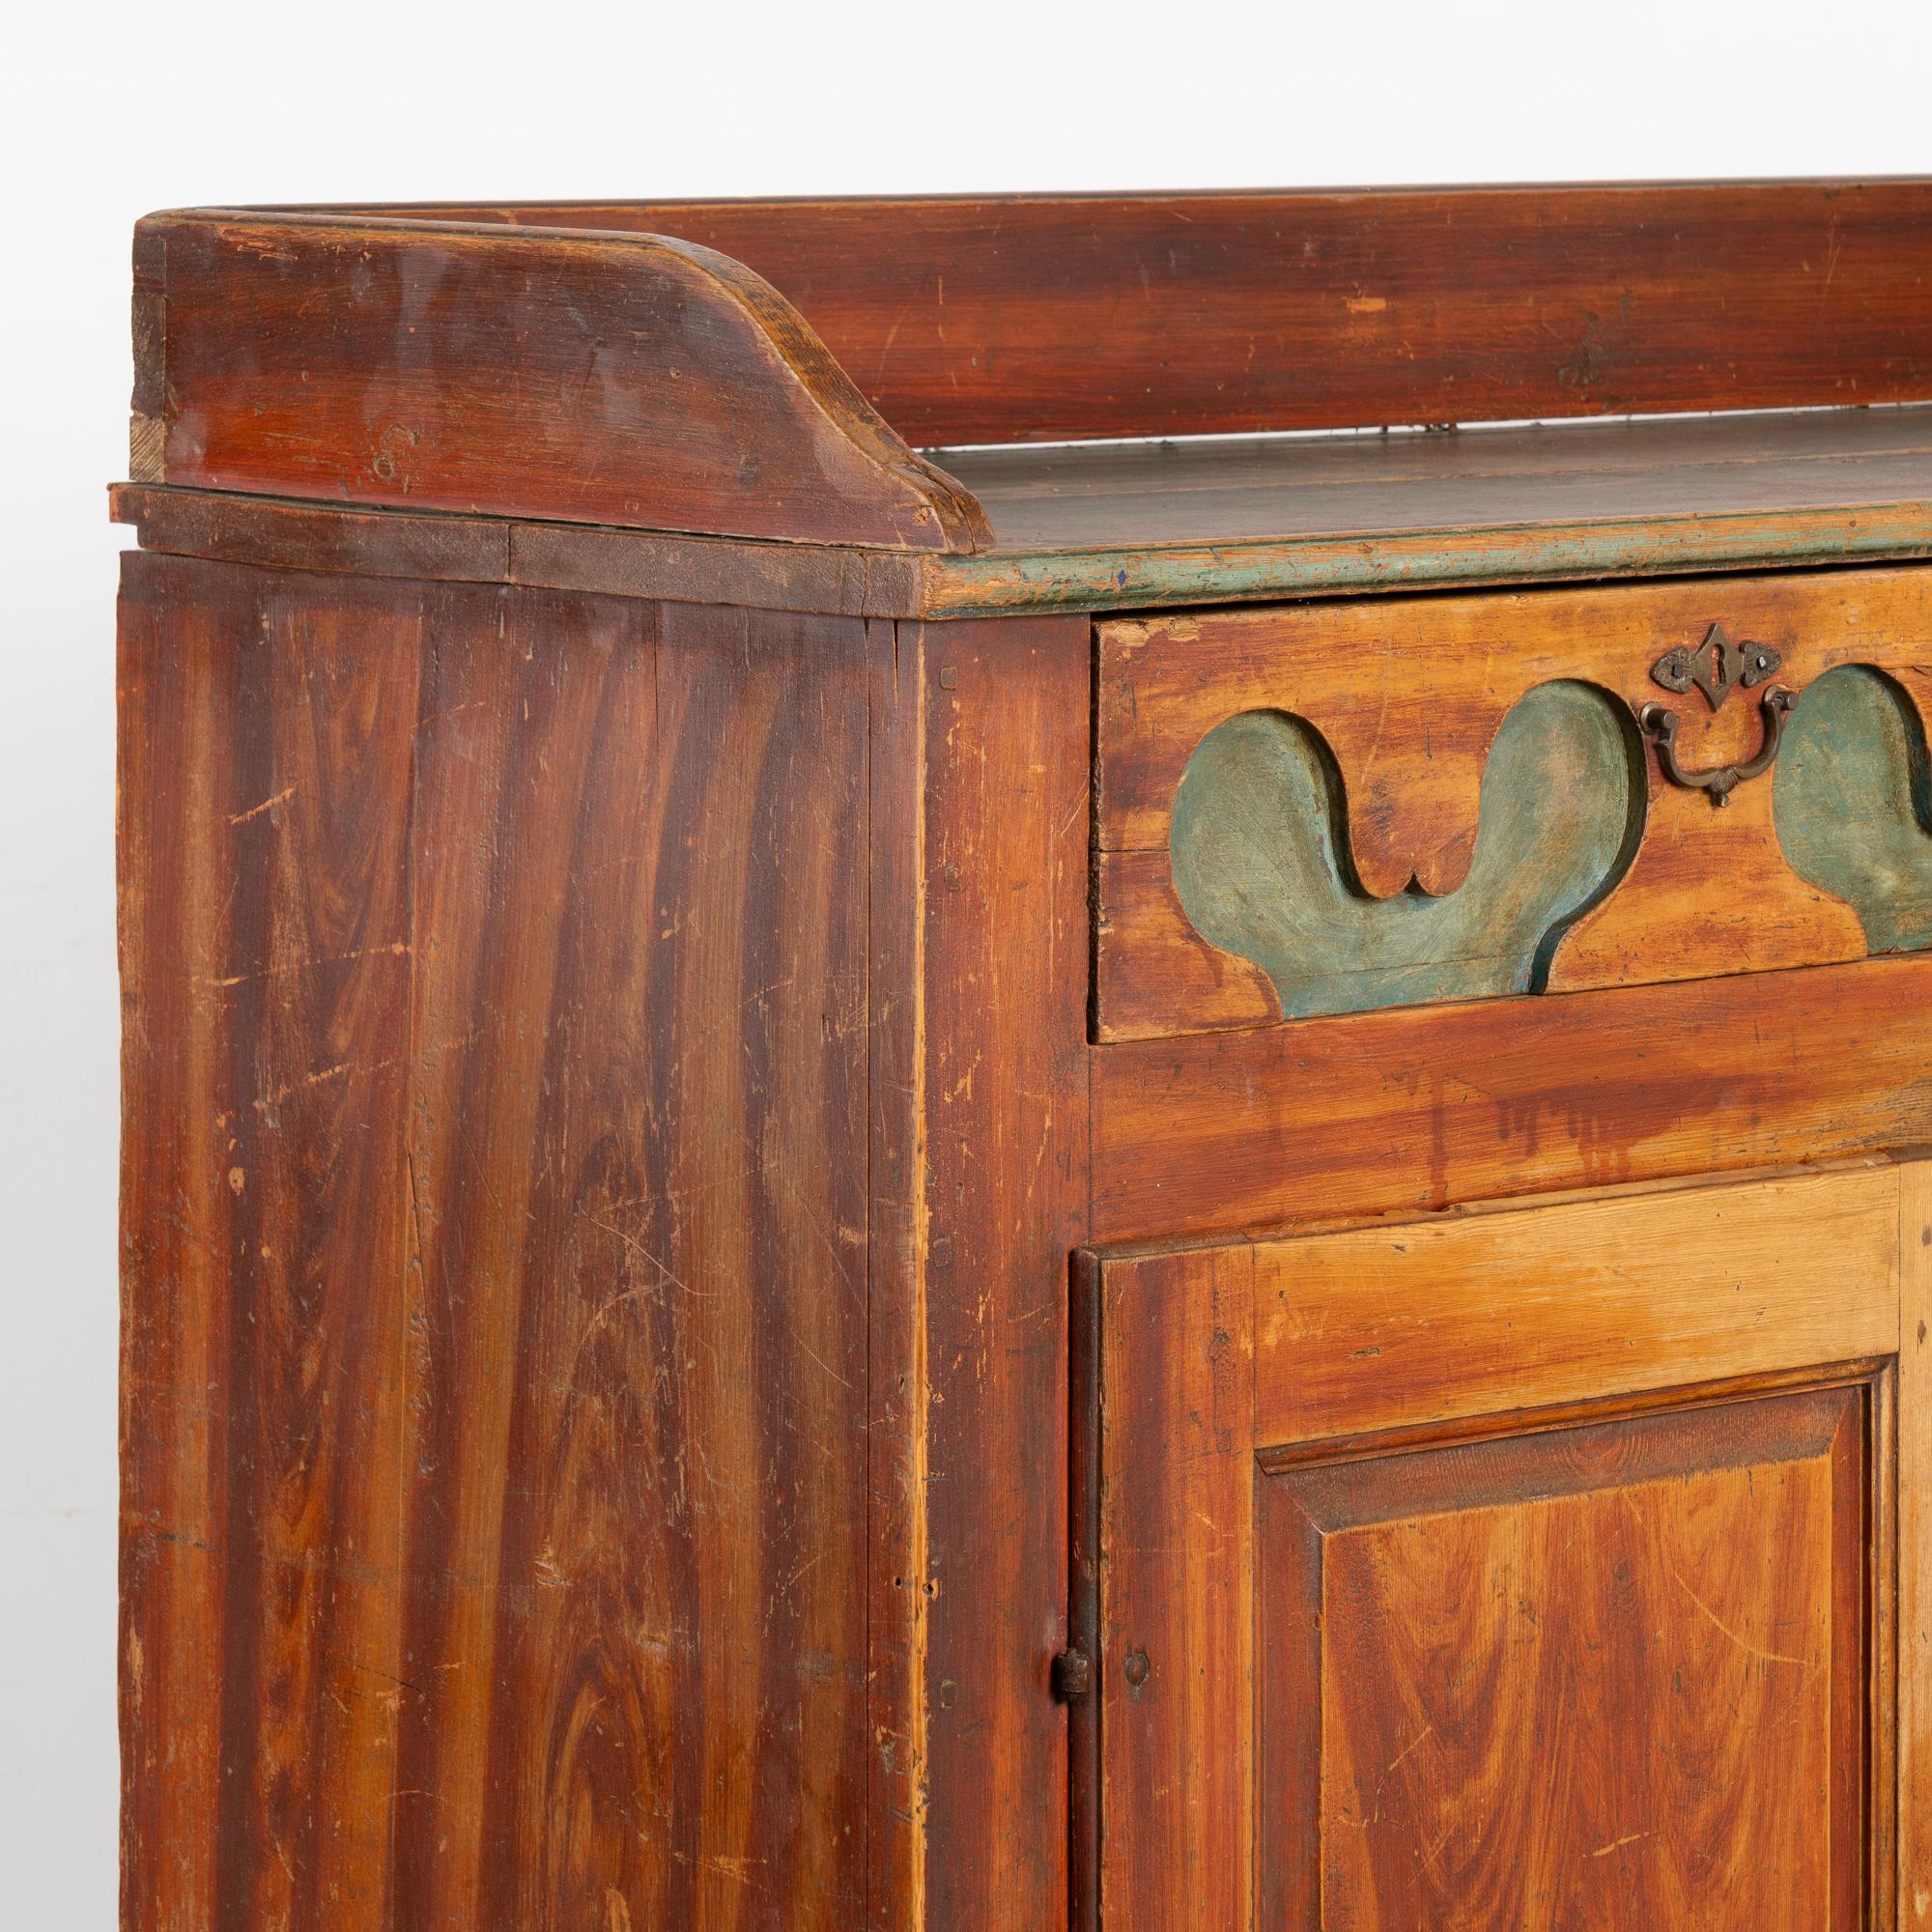 19th Century Original Painted Sideboard Cabinet from Sweden, circa 1820-40 For Sale